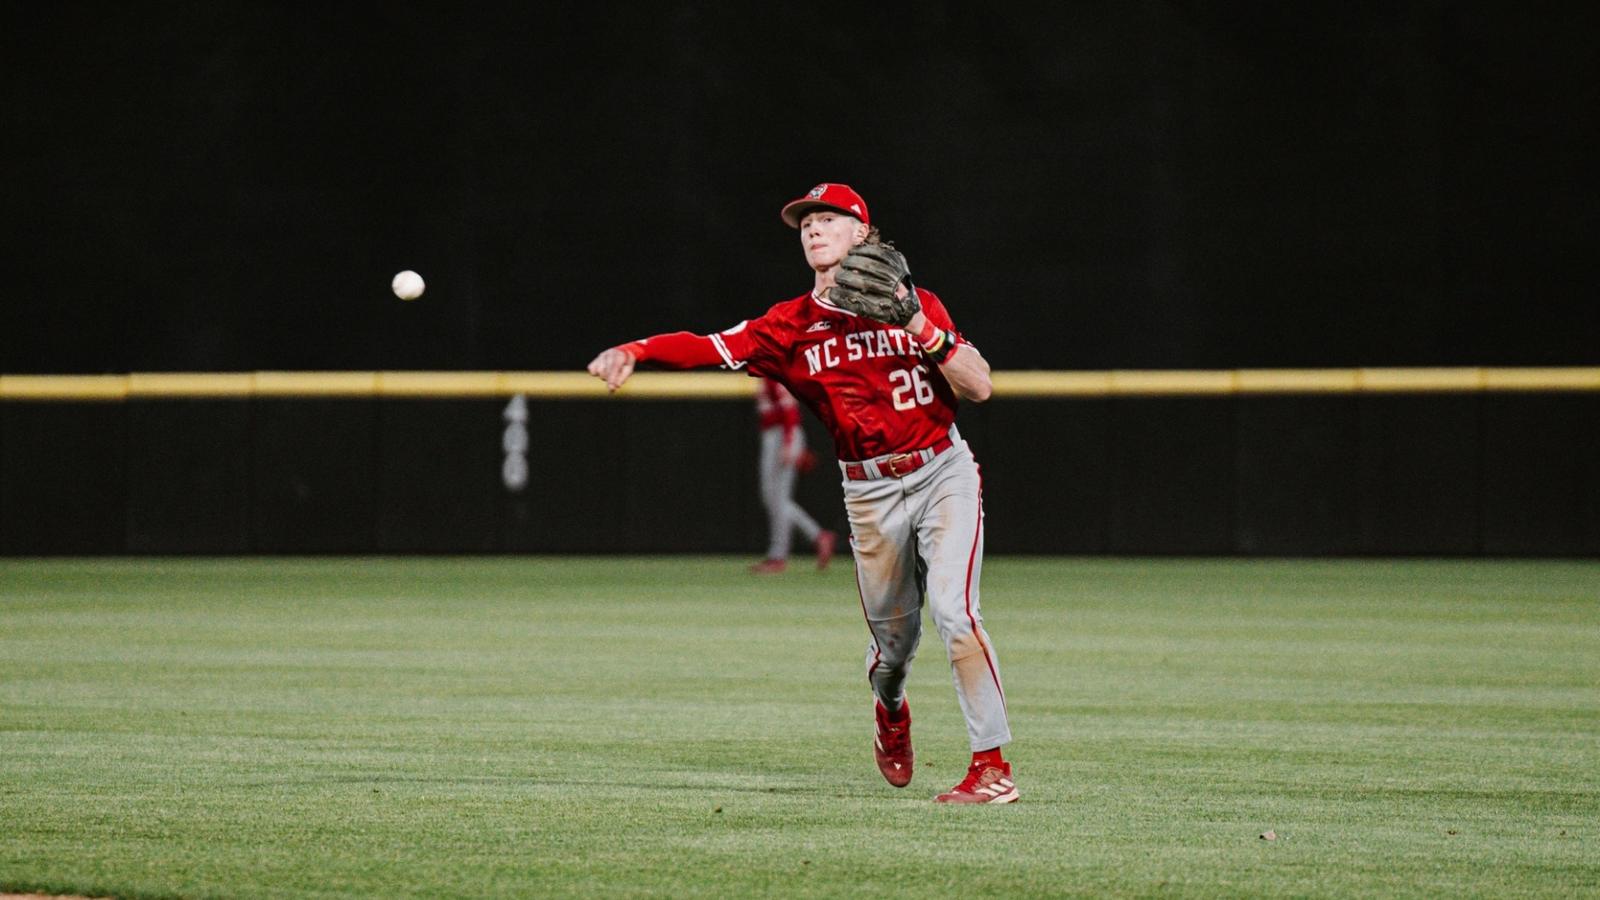 #21 NC State Baseball Loses 10-6 to #7 ECU with Back-to-Back-To-Back Home Runs